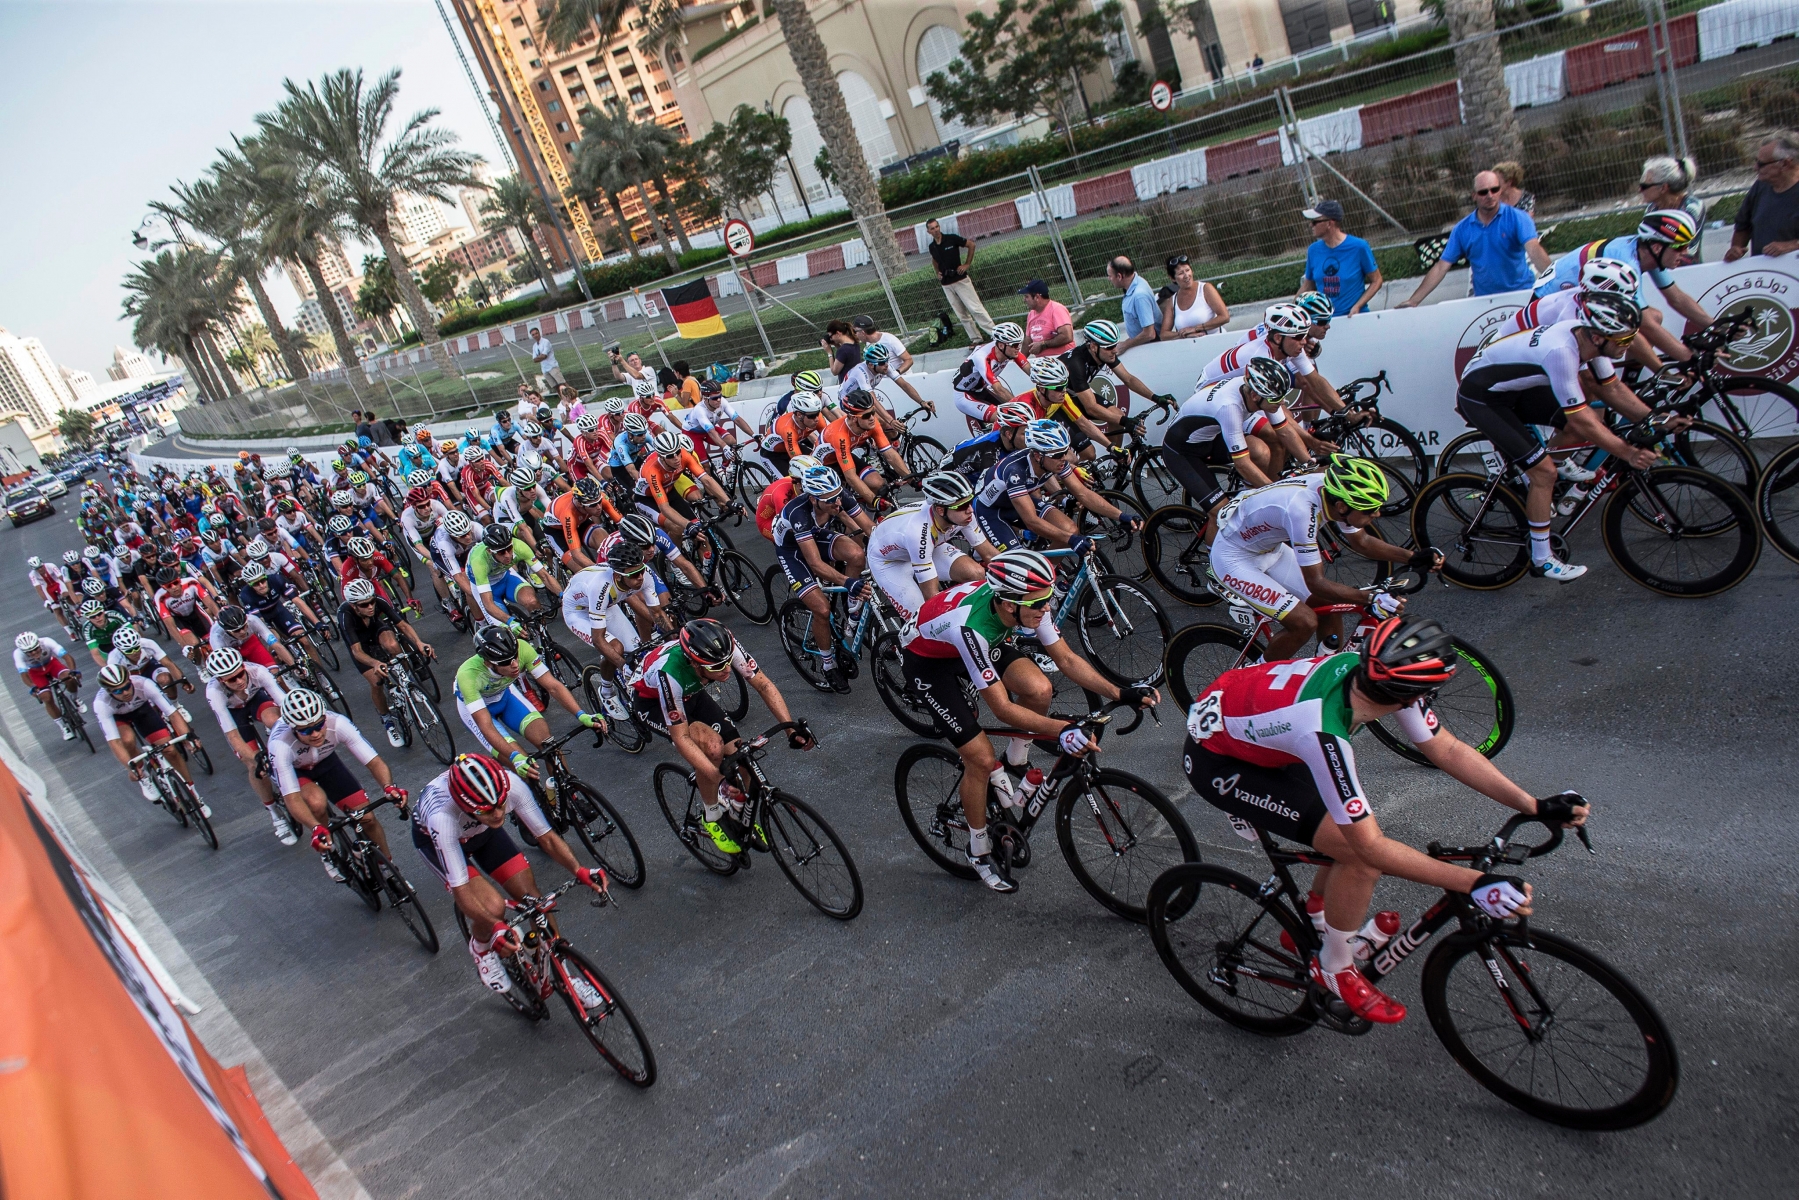 epa05583730 Riders of the Swiss team (front R) lead the pack during the Men's Under 23 Road Race over 166km of the 2016 UCI Road Cycling World Championships in Qatar, Doha, 13 October 2016.  EPA/OLIVER WEIKEN QATAR ROAD CYCLING WORLD CHAMPIONSHIPS 2016